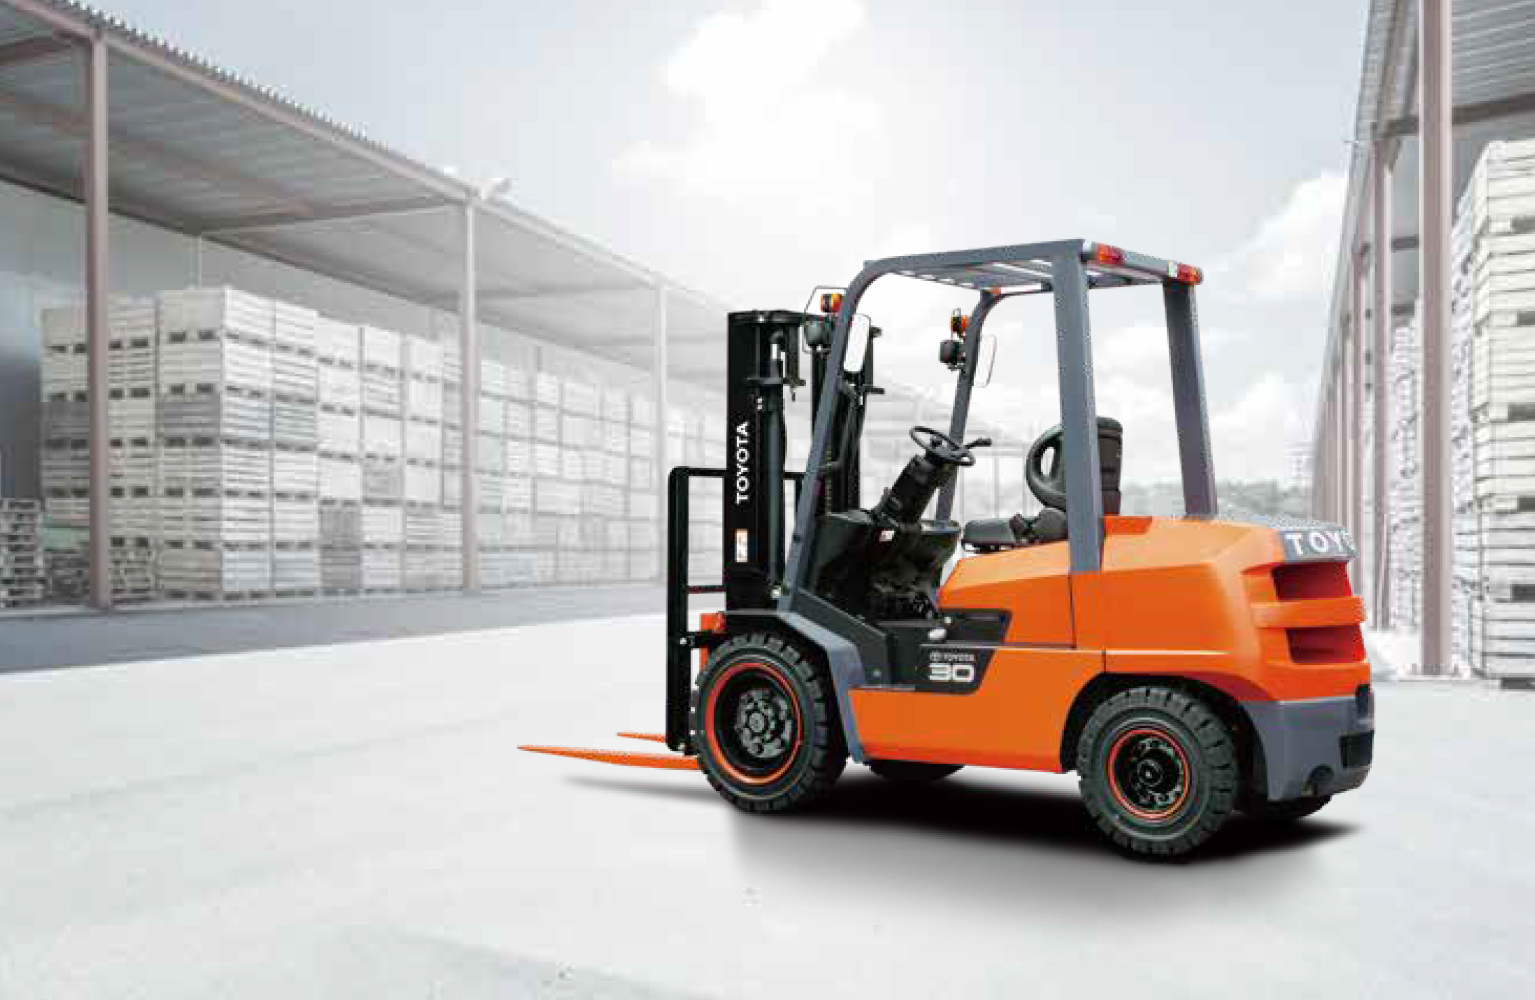 TOYOTA Z- Series Forklift FGZN/FDZN 2 to 3t | AB Equipment